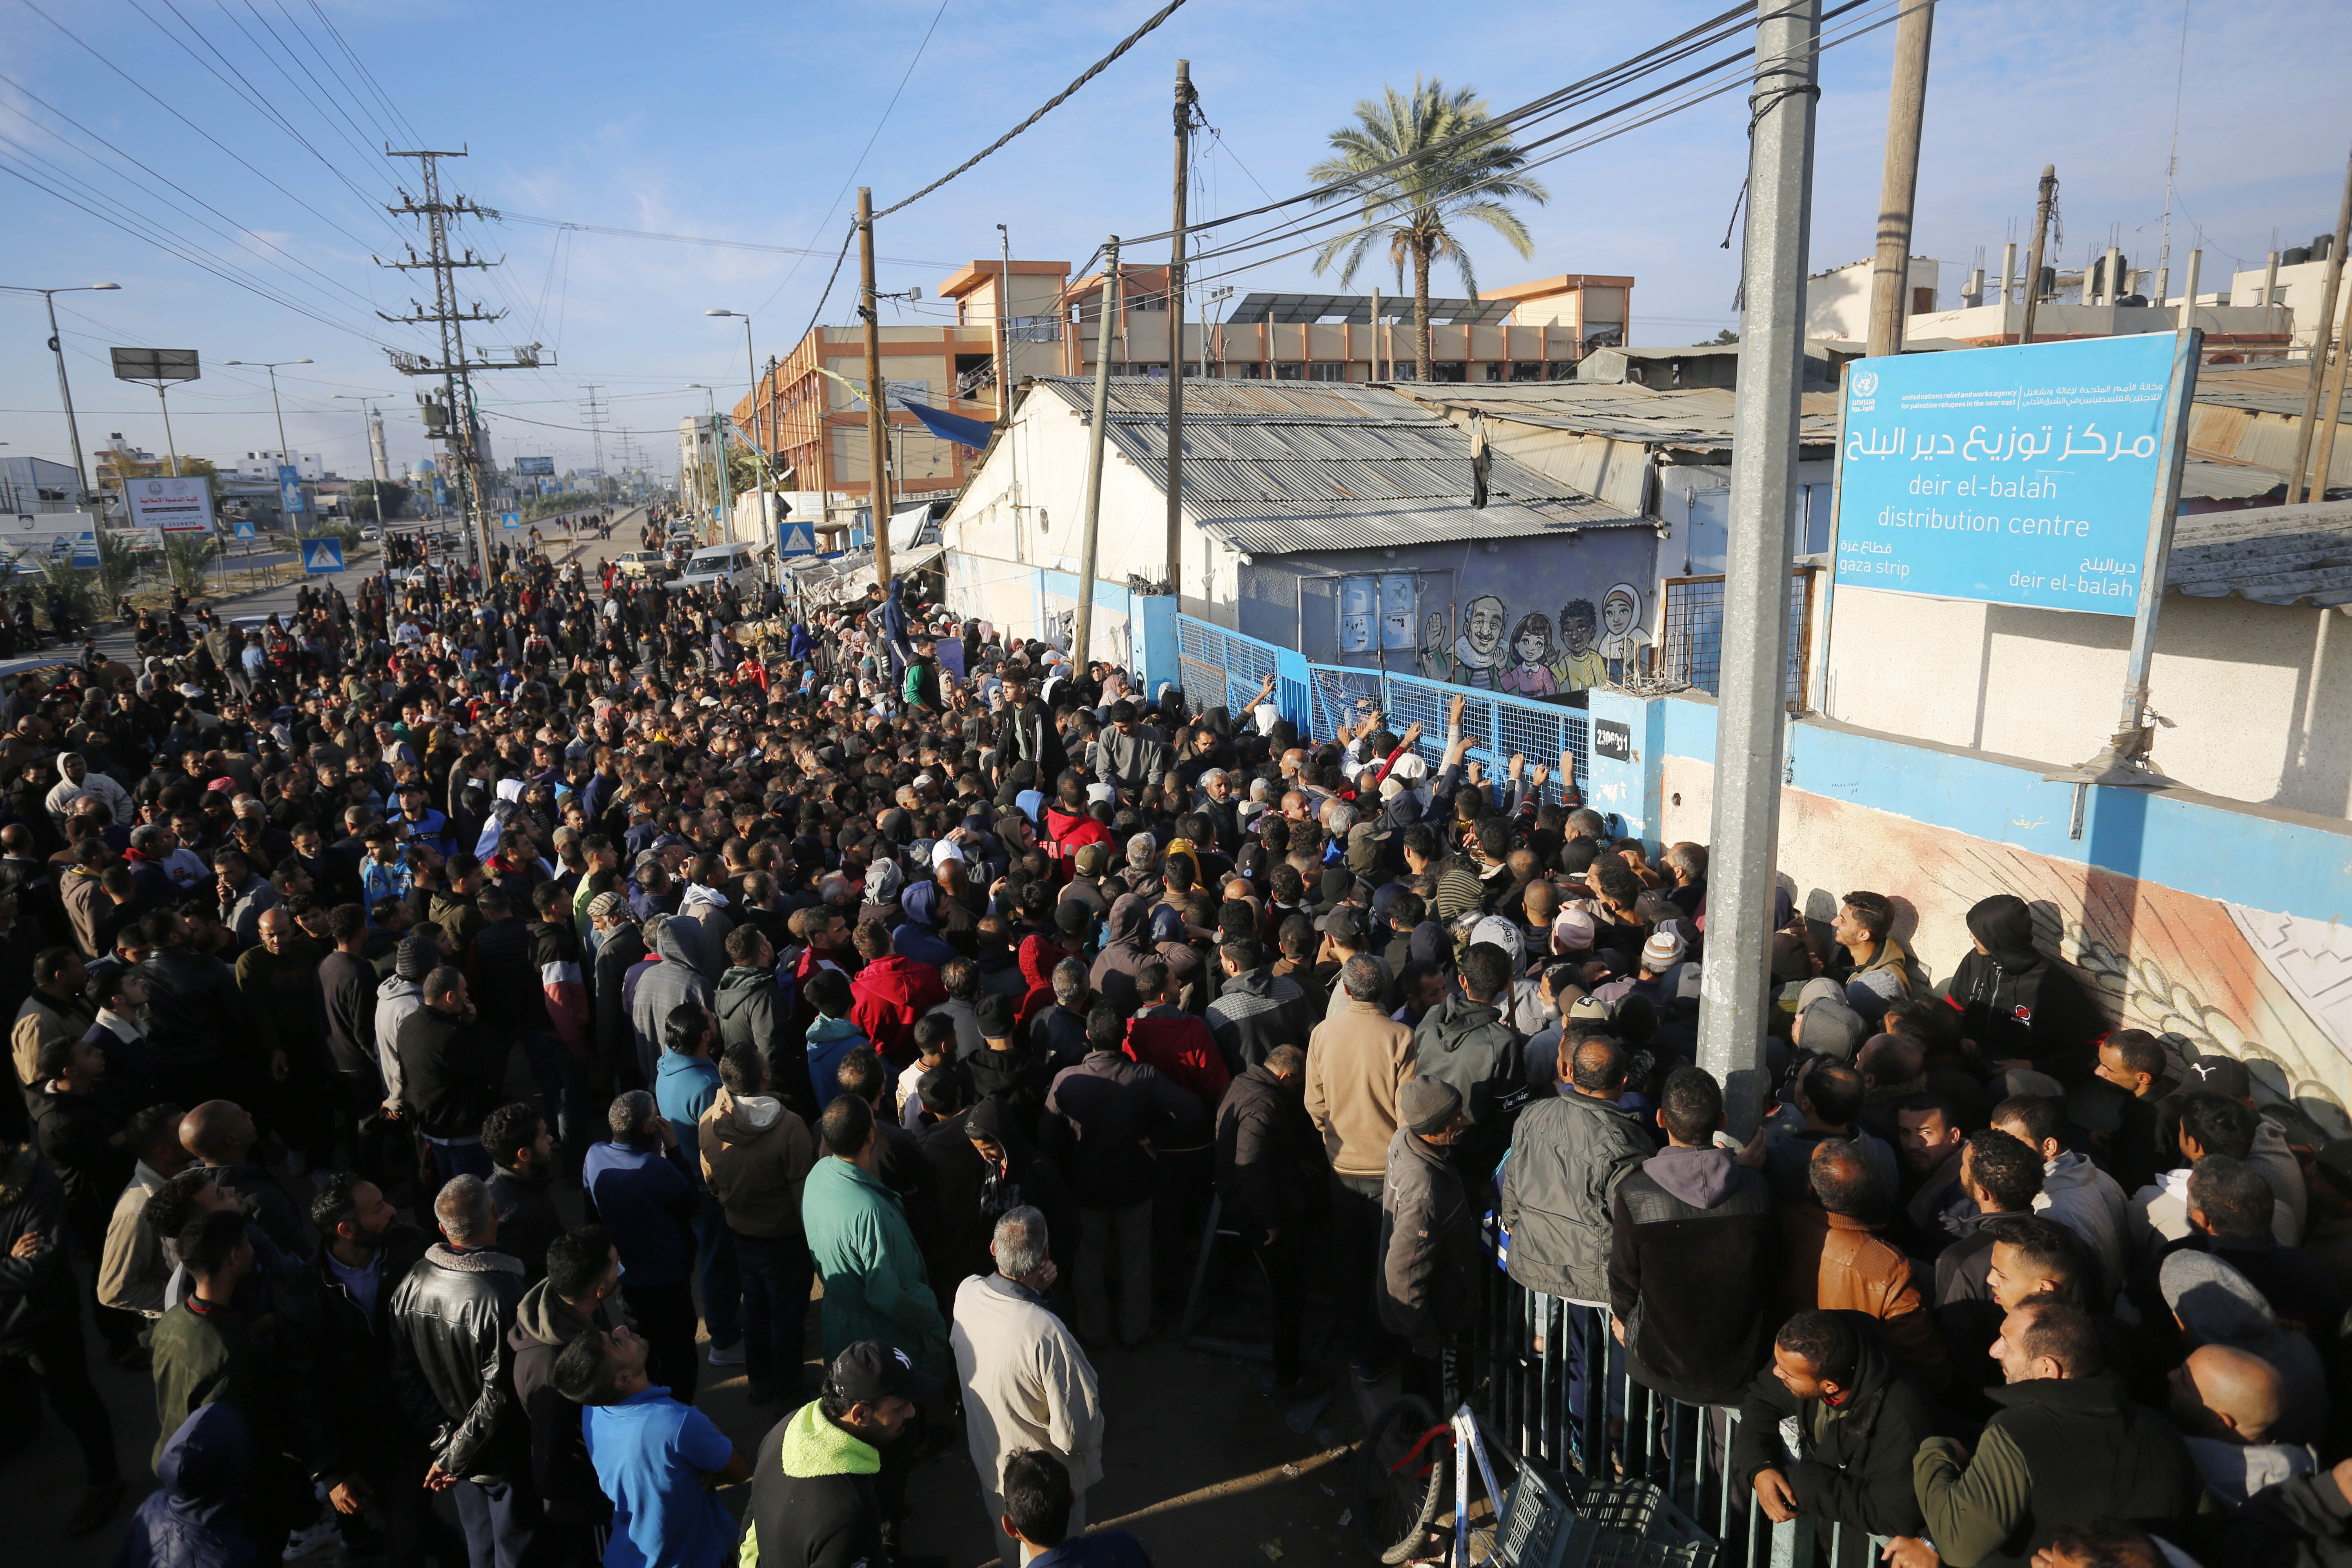 People line up for flour being distributed by the United Nations Relief and Works Agency for Palestine Refugees in the Near East (UNRWA), in Deir al-Balah, Gaza, on December 7.